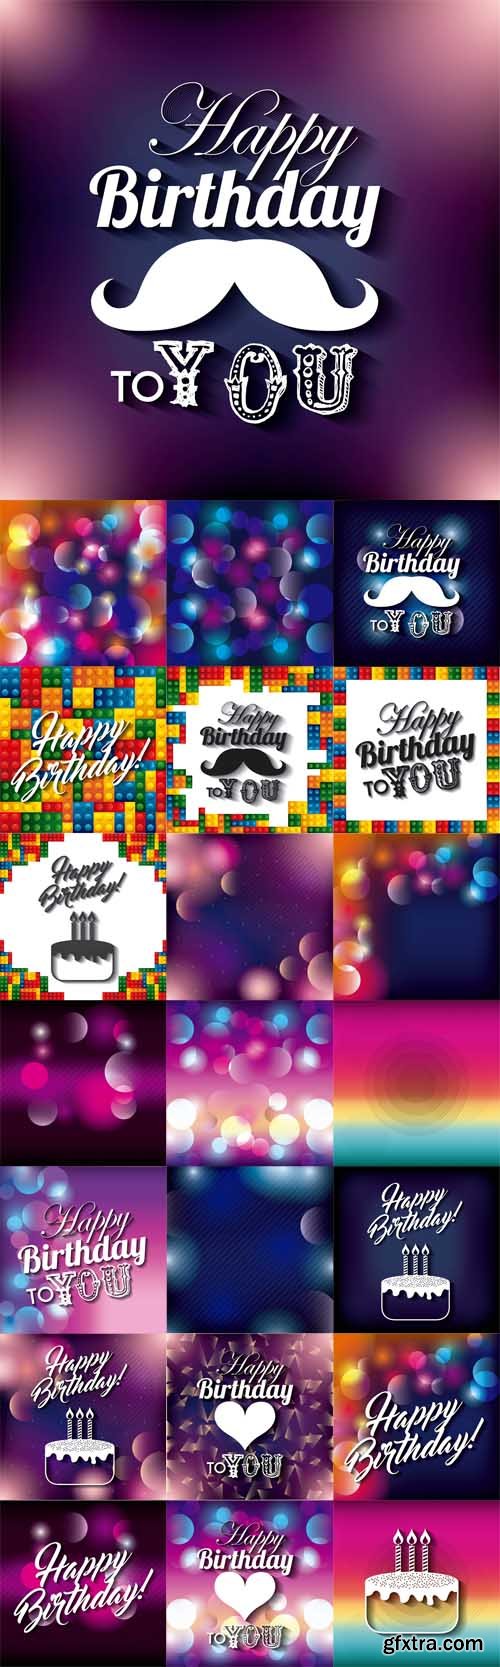 Vector Set - Blurred Backgrounds and Happy Birthday Design